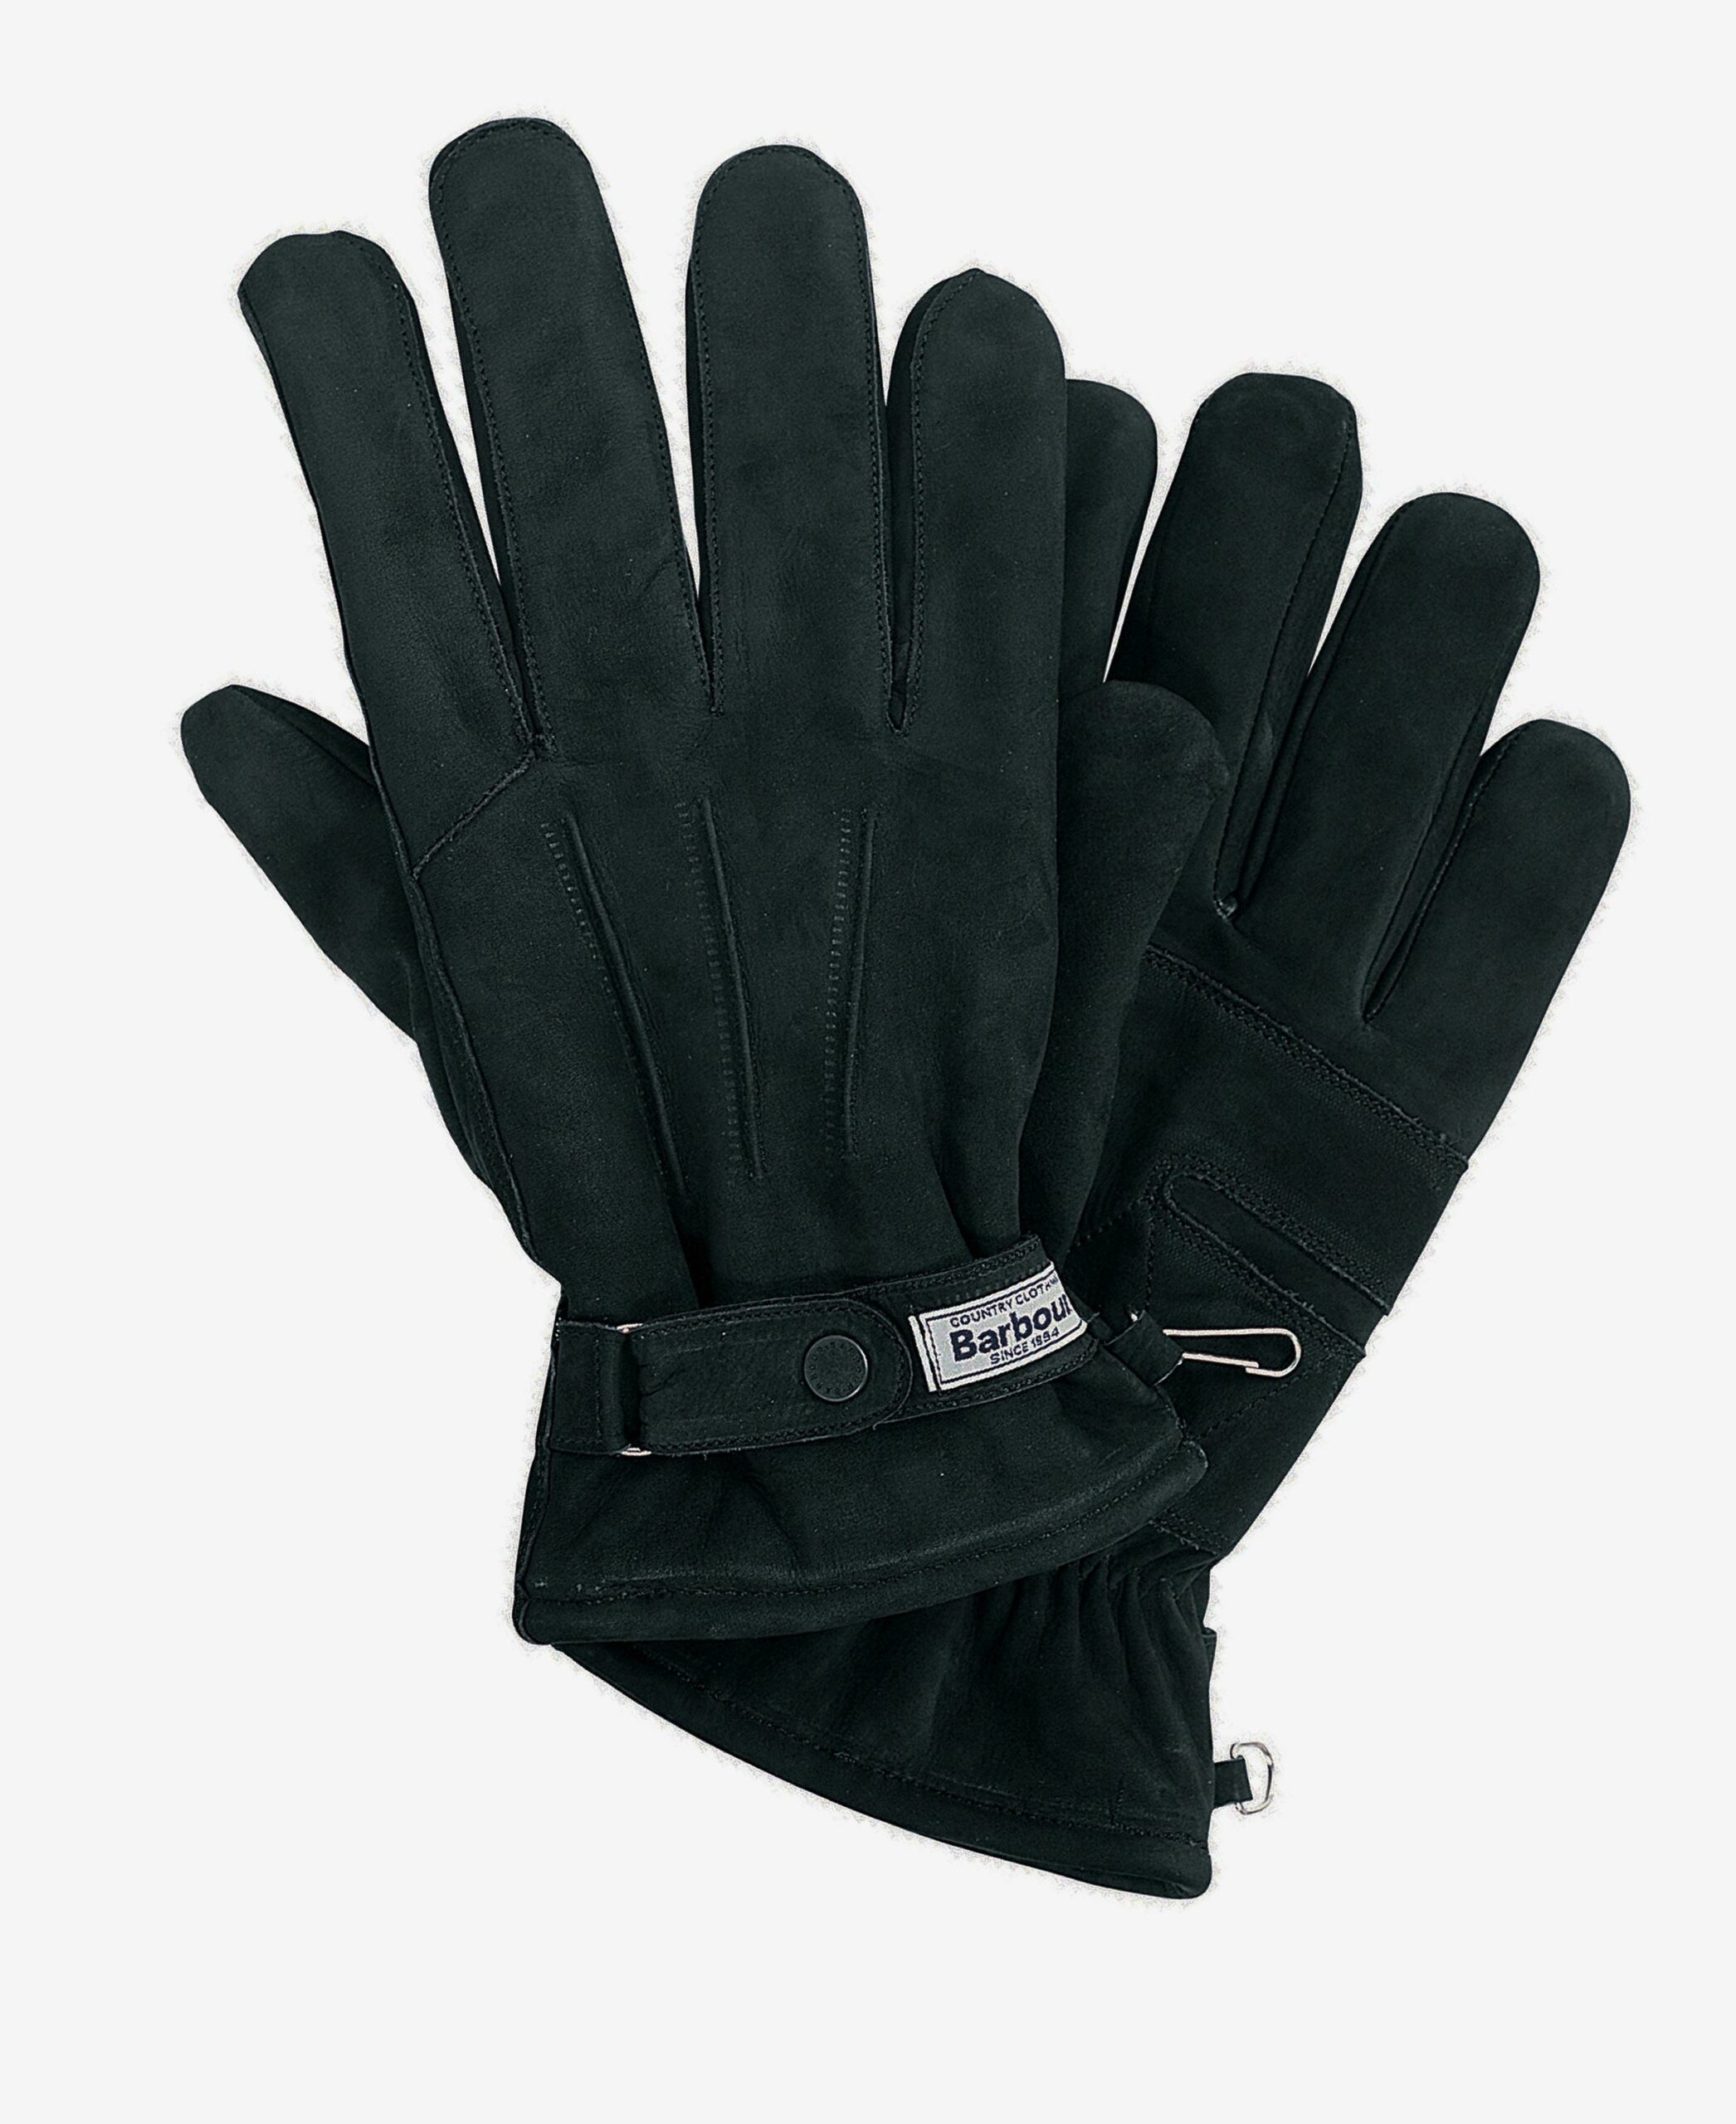 Barbour Insulated Leather Gloves-Black - Aston Bourne